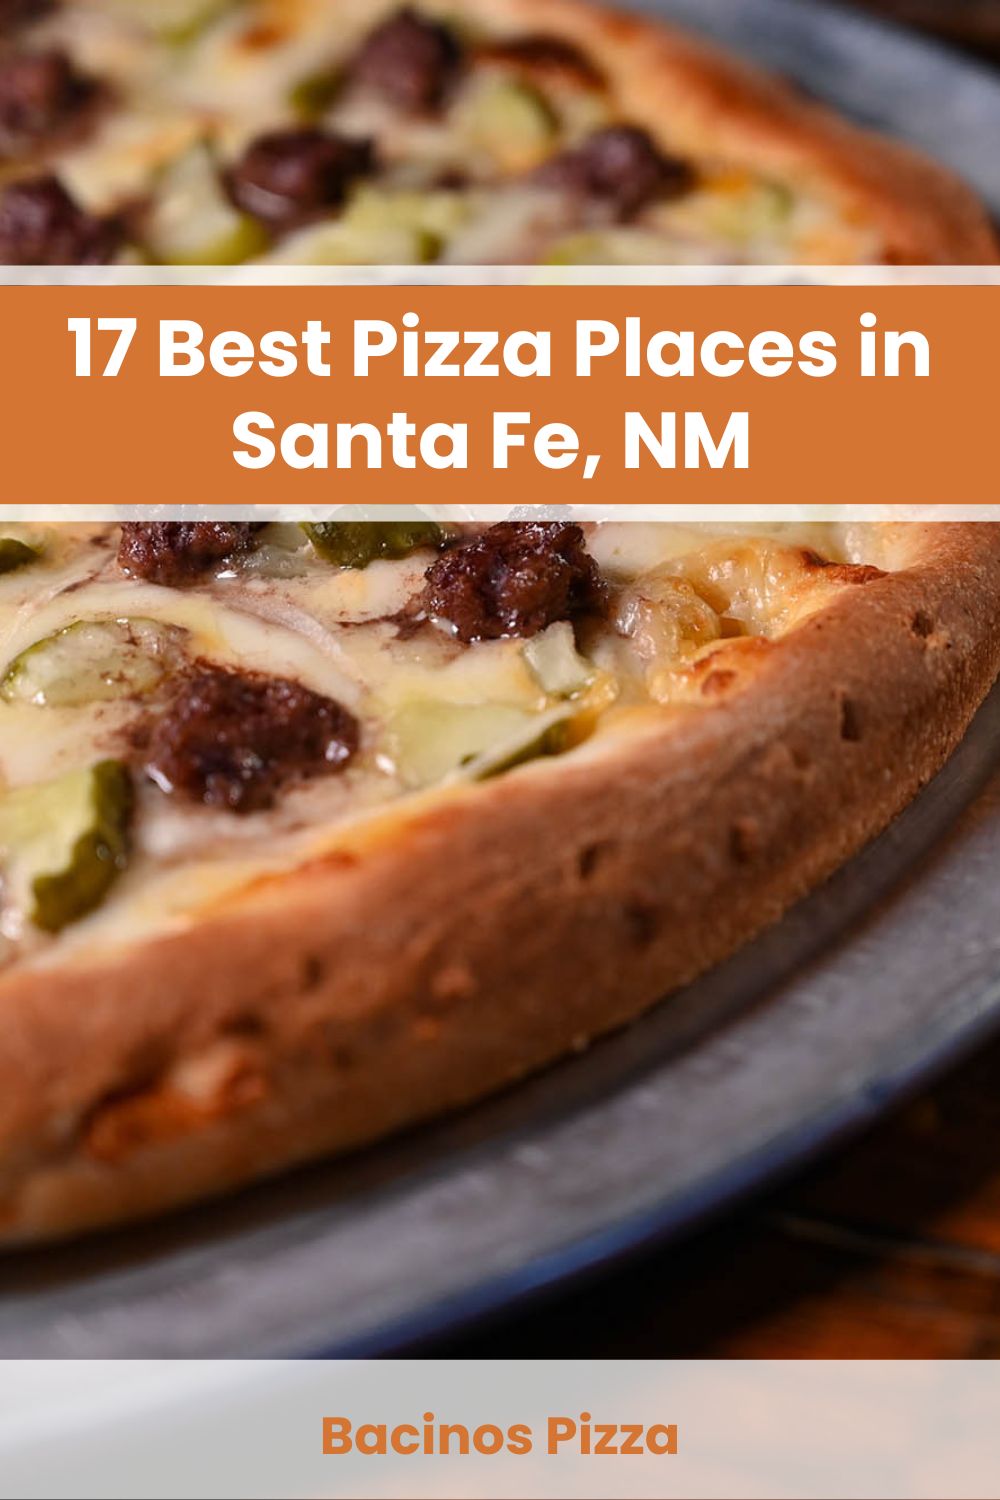 Best Pizza Places in Santa Fe, NM